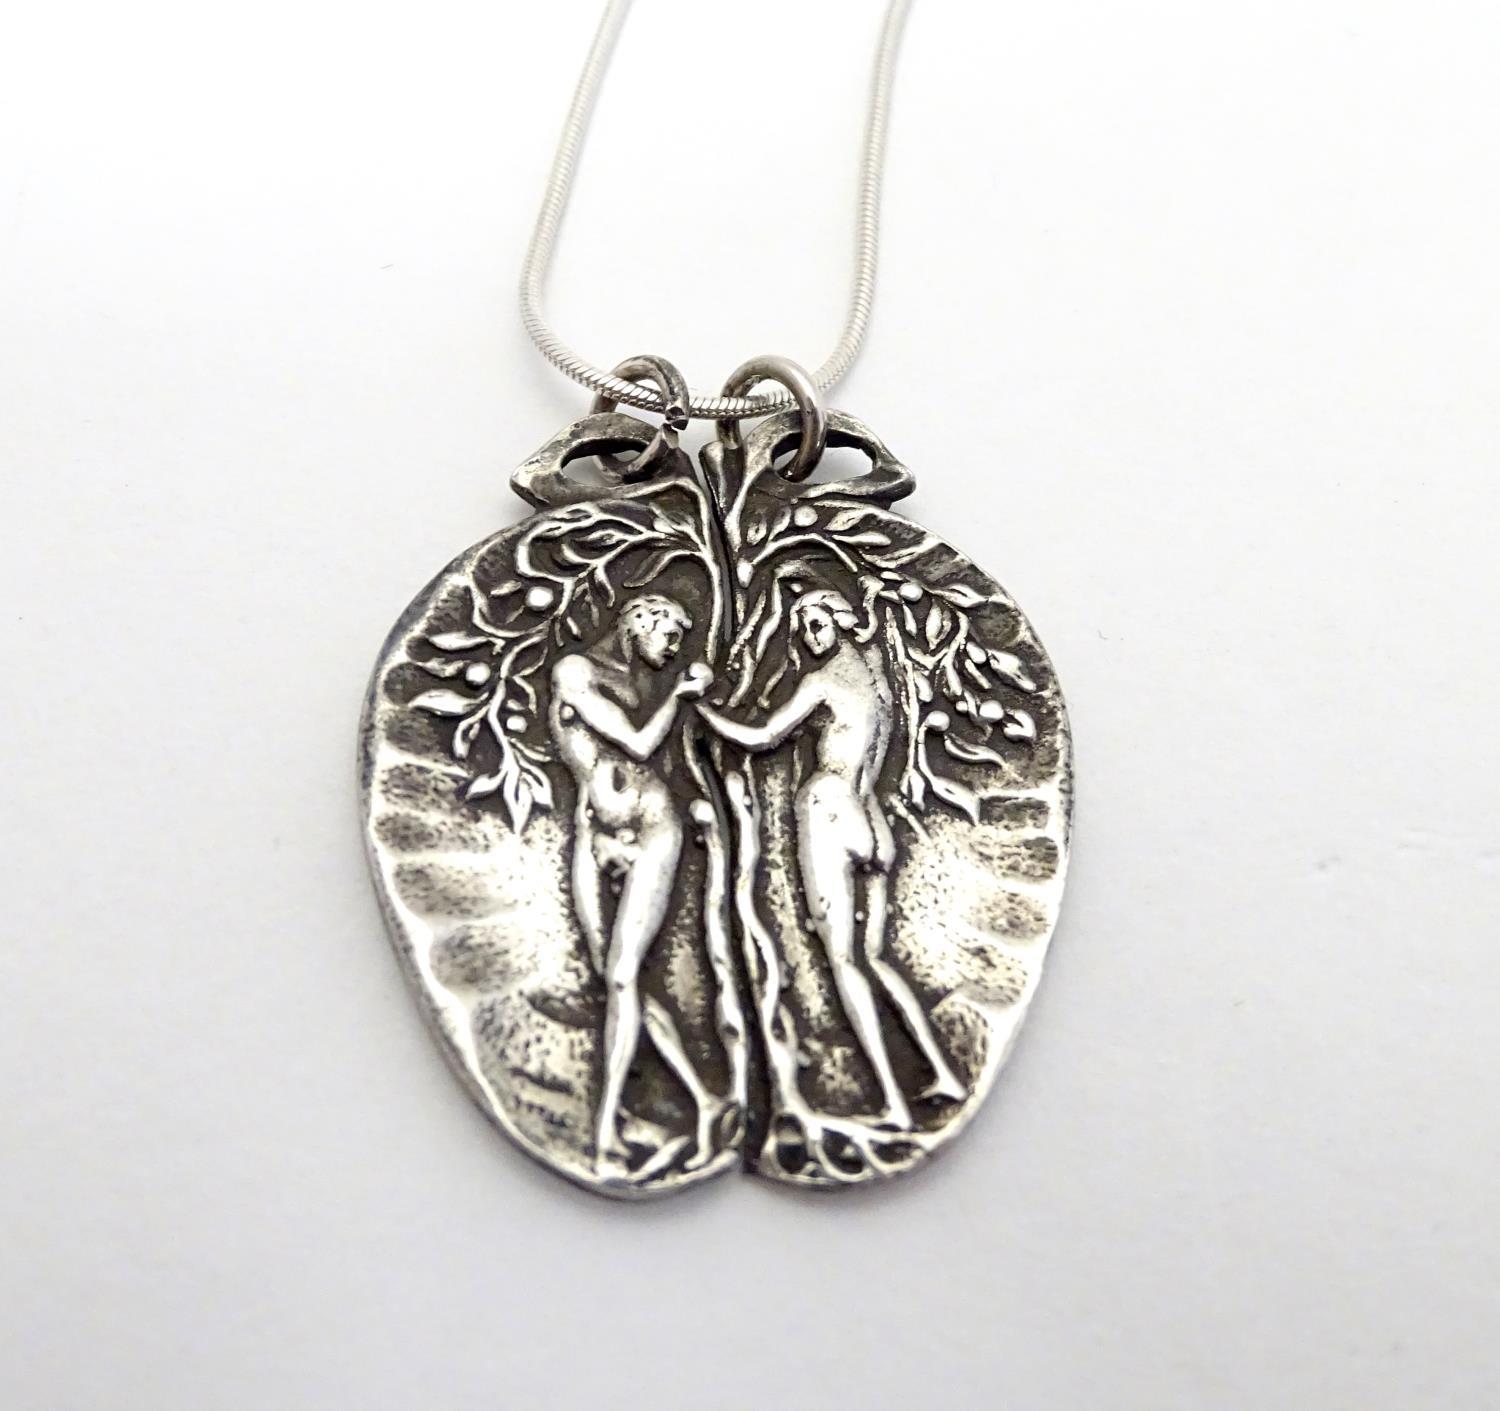 A silver pendant on chain, the pendant formed as an apple with a depiction of Adam and Eve.